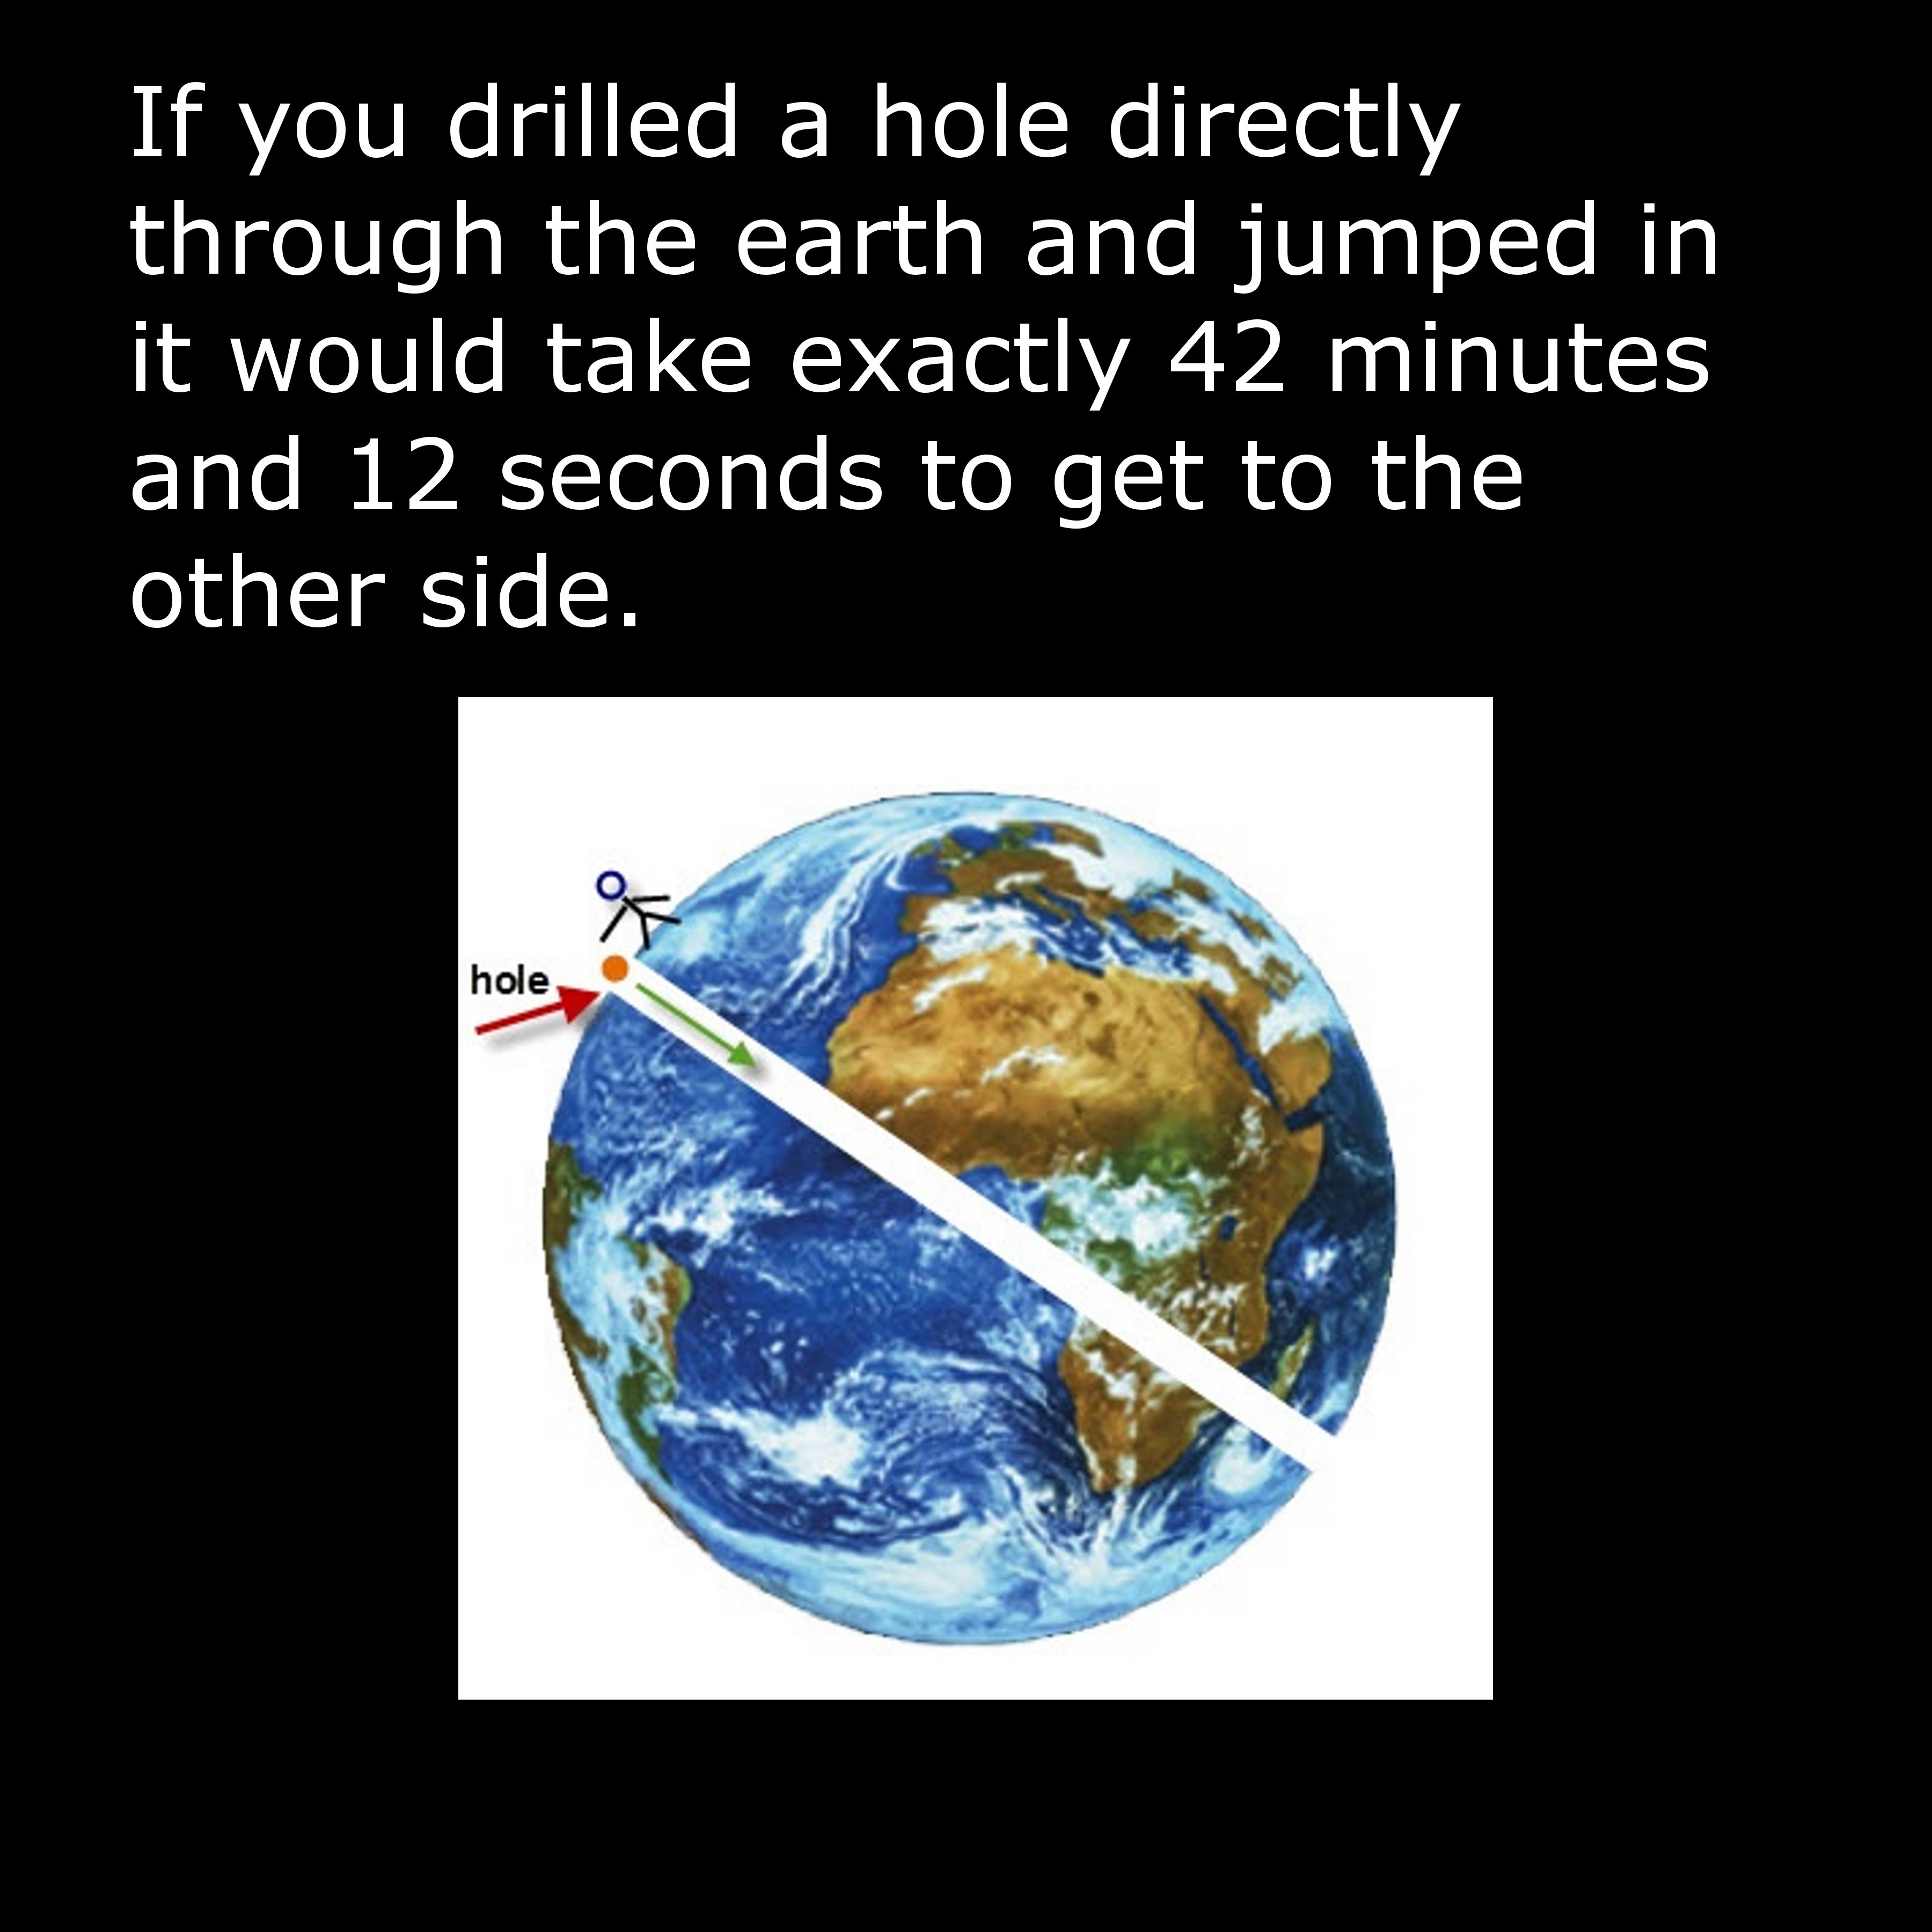 earth - If you drilled a hole directly through the earth and jumped in it would take exactly 42 minutes and 12 seconds to get to the other side. hole